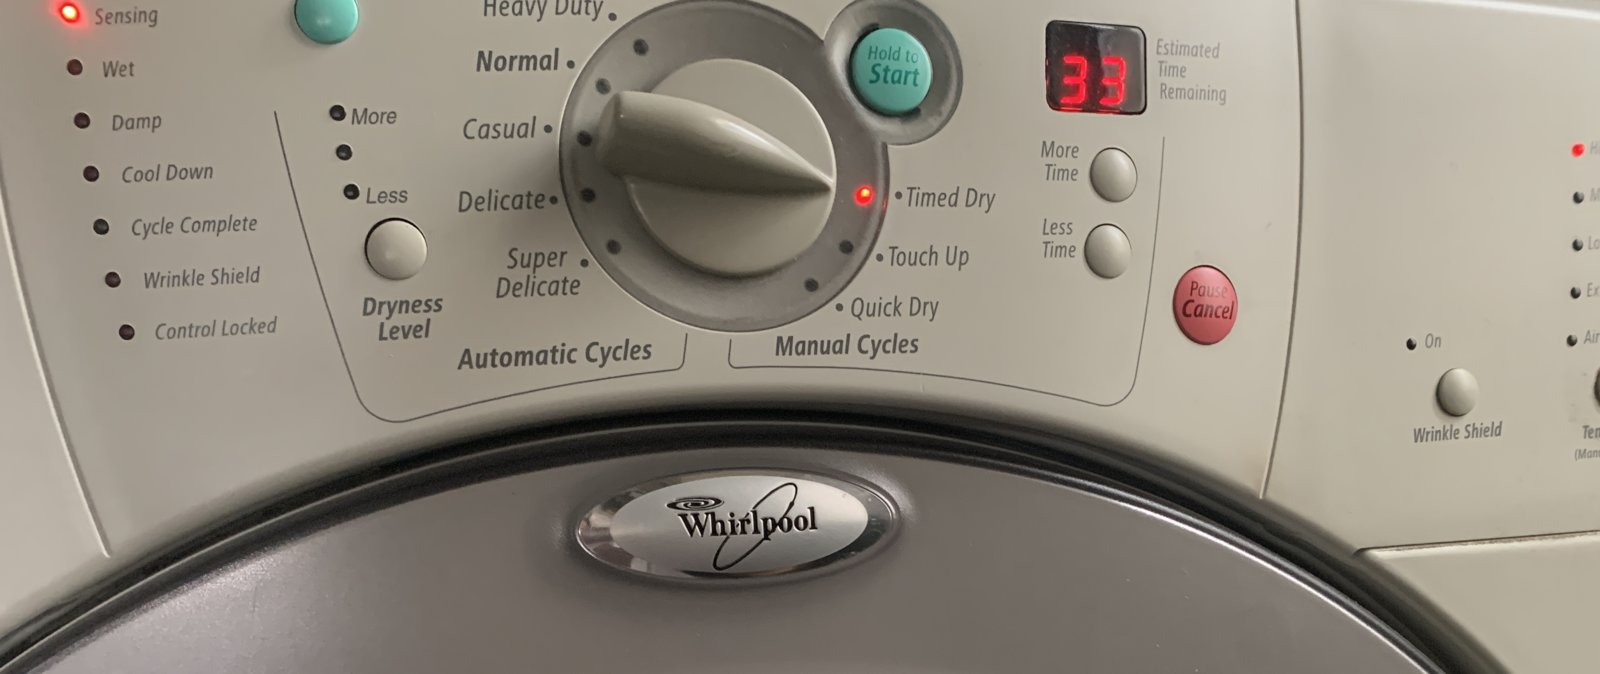 Why Is My Whirlpool Washer Stuck On Sensing